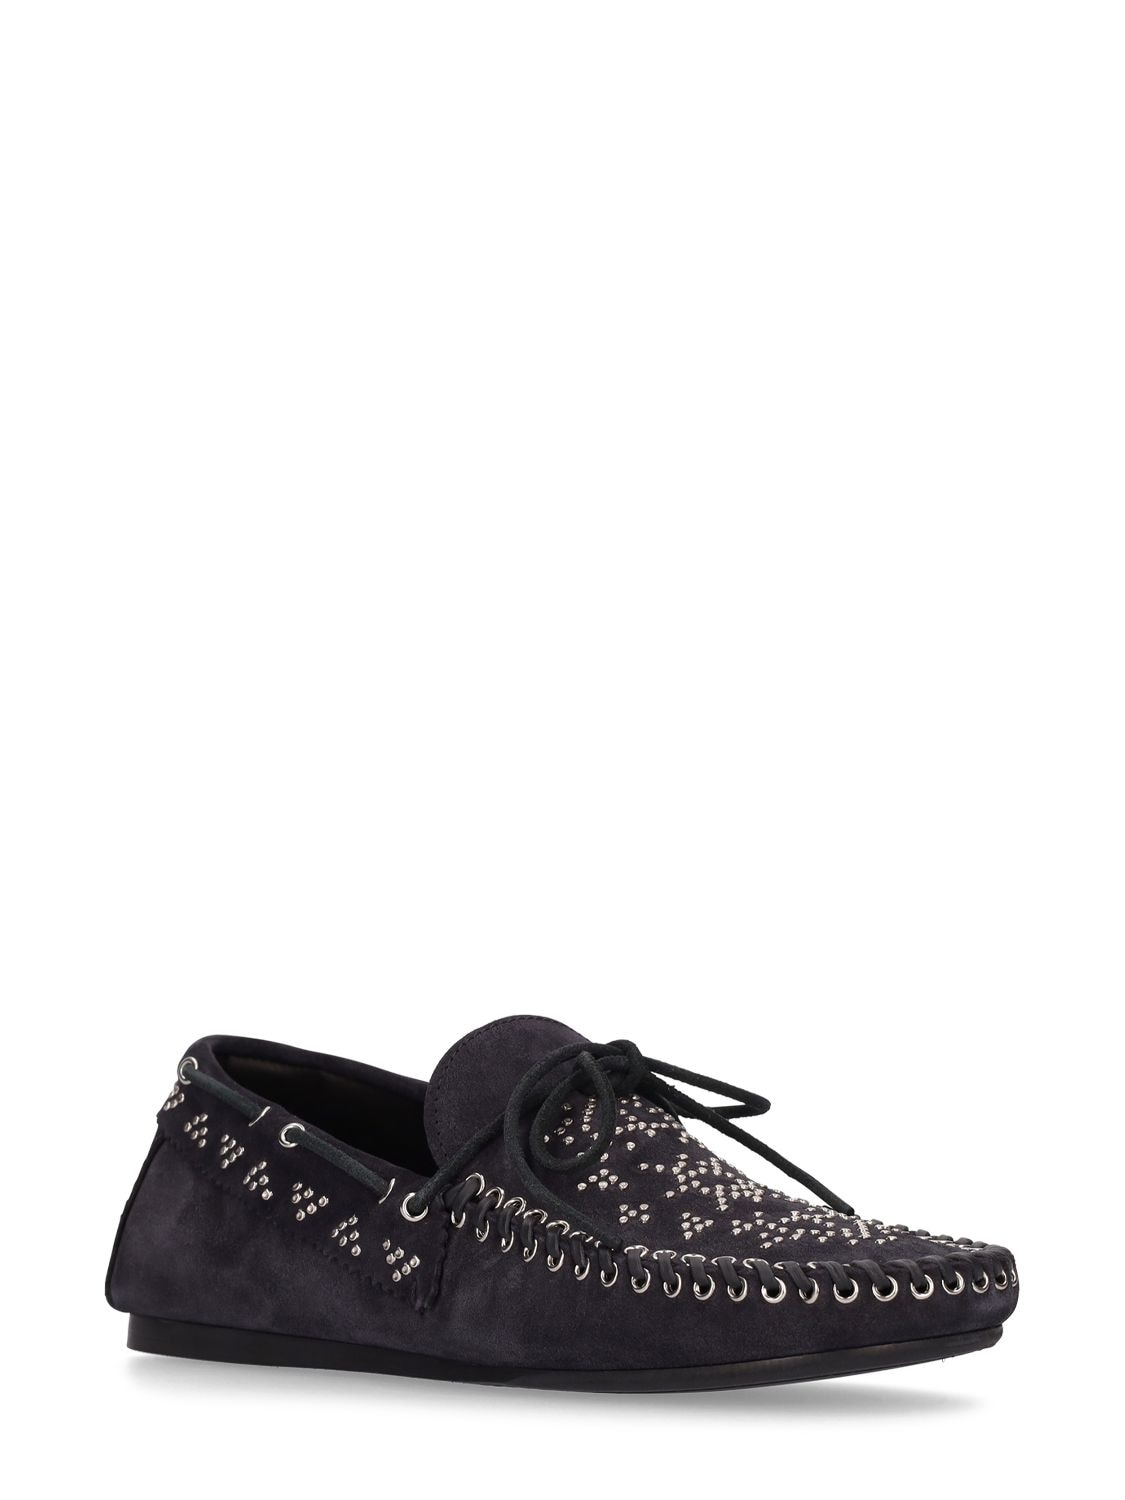 ISABEL MARANT 10mm Freen Studded Suede Loafers